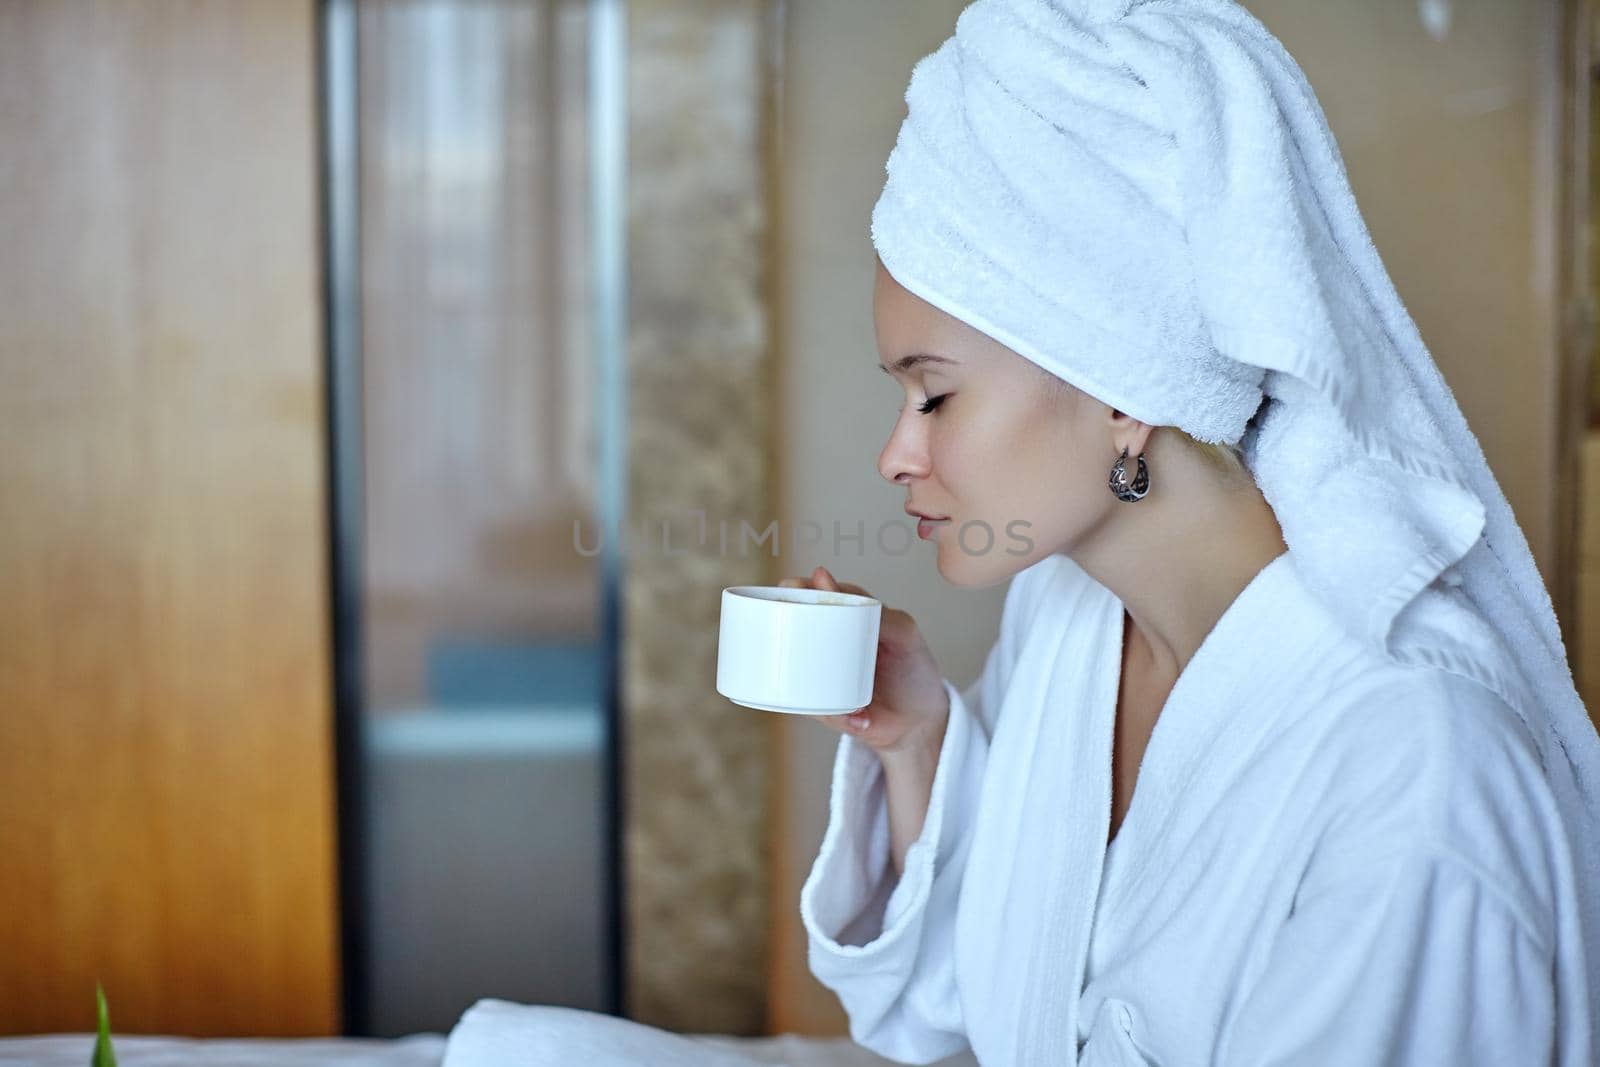 Beautiful Luxury Life. Breakfast. Happy Girl with a Cup of Coffee. Home Style Relaxation Woman Wearing Bathrobe and Towel after Shower. Spa Good Morning.